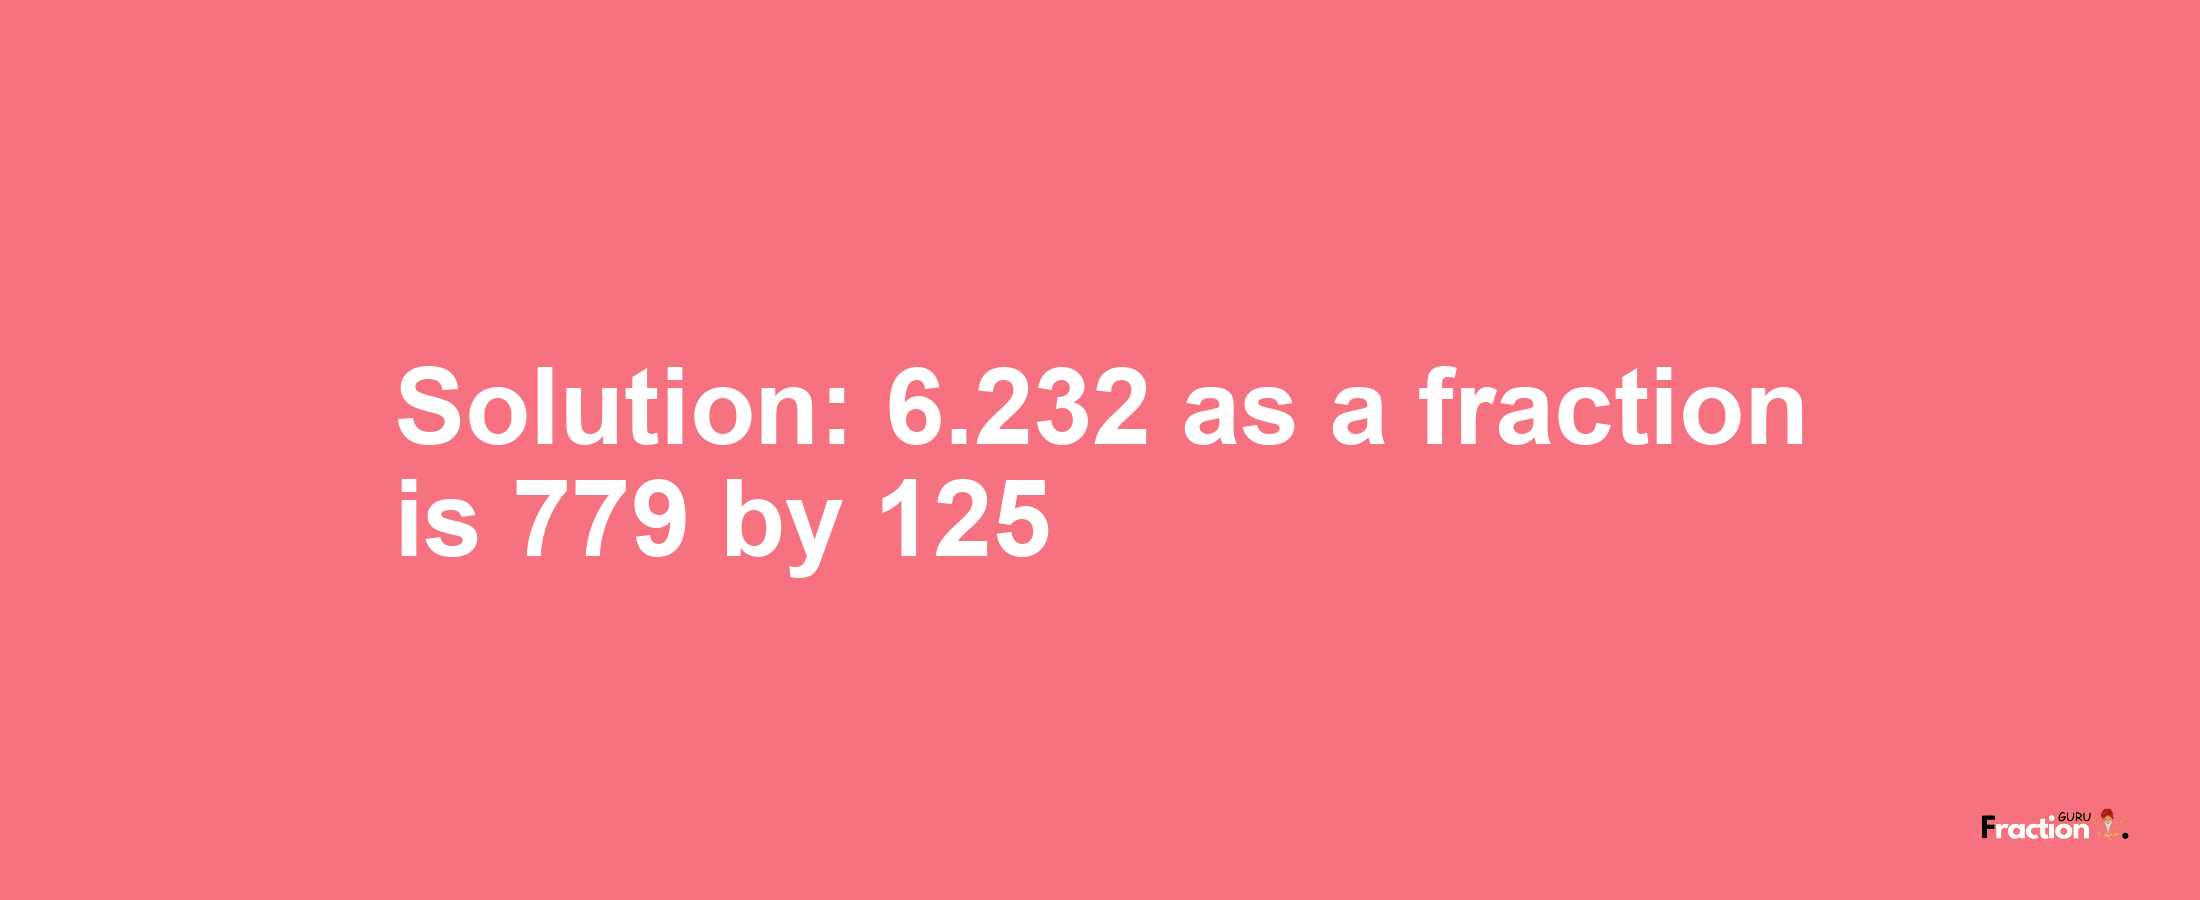 Solution:6.232 as a fraction is 779/125